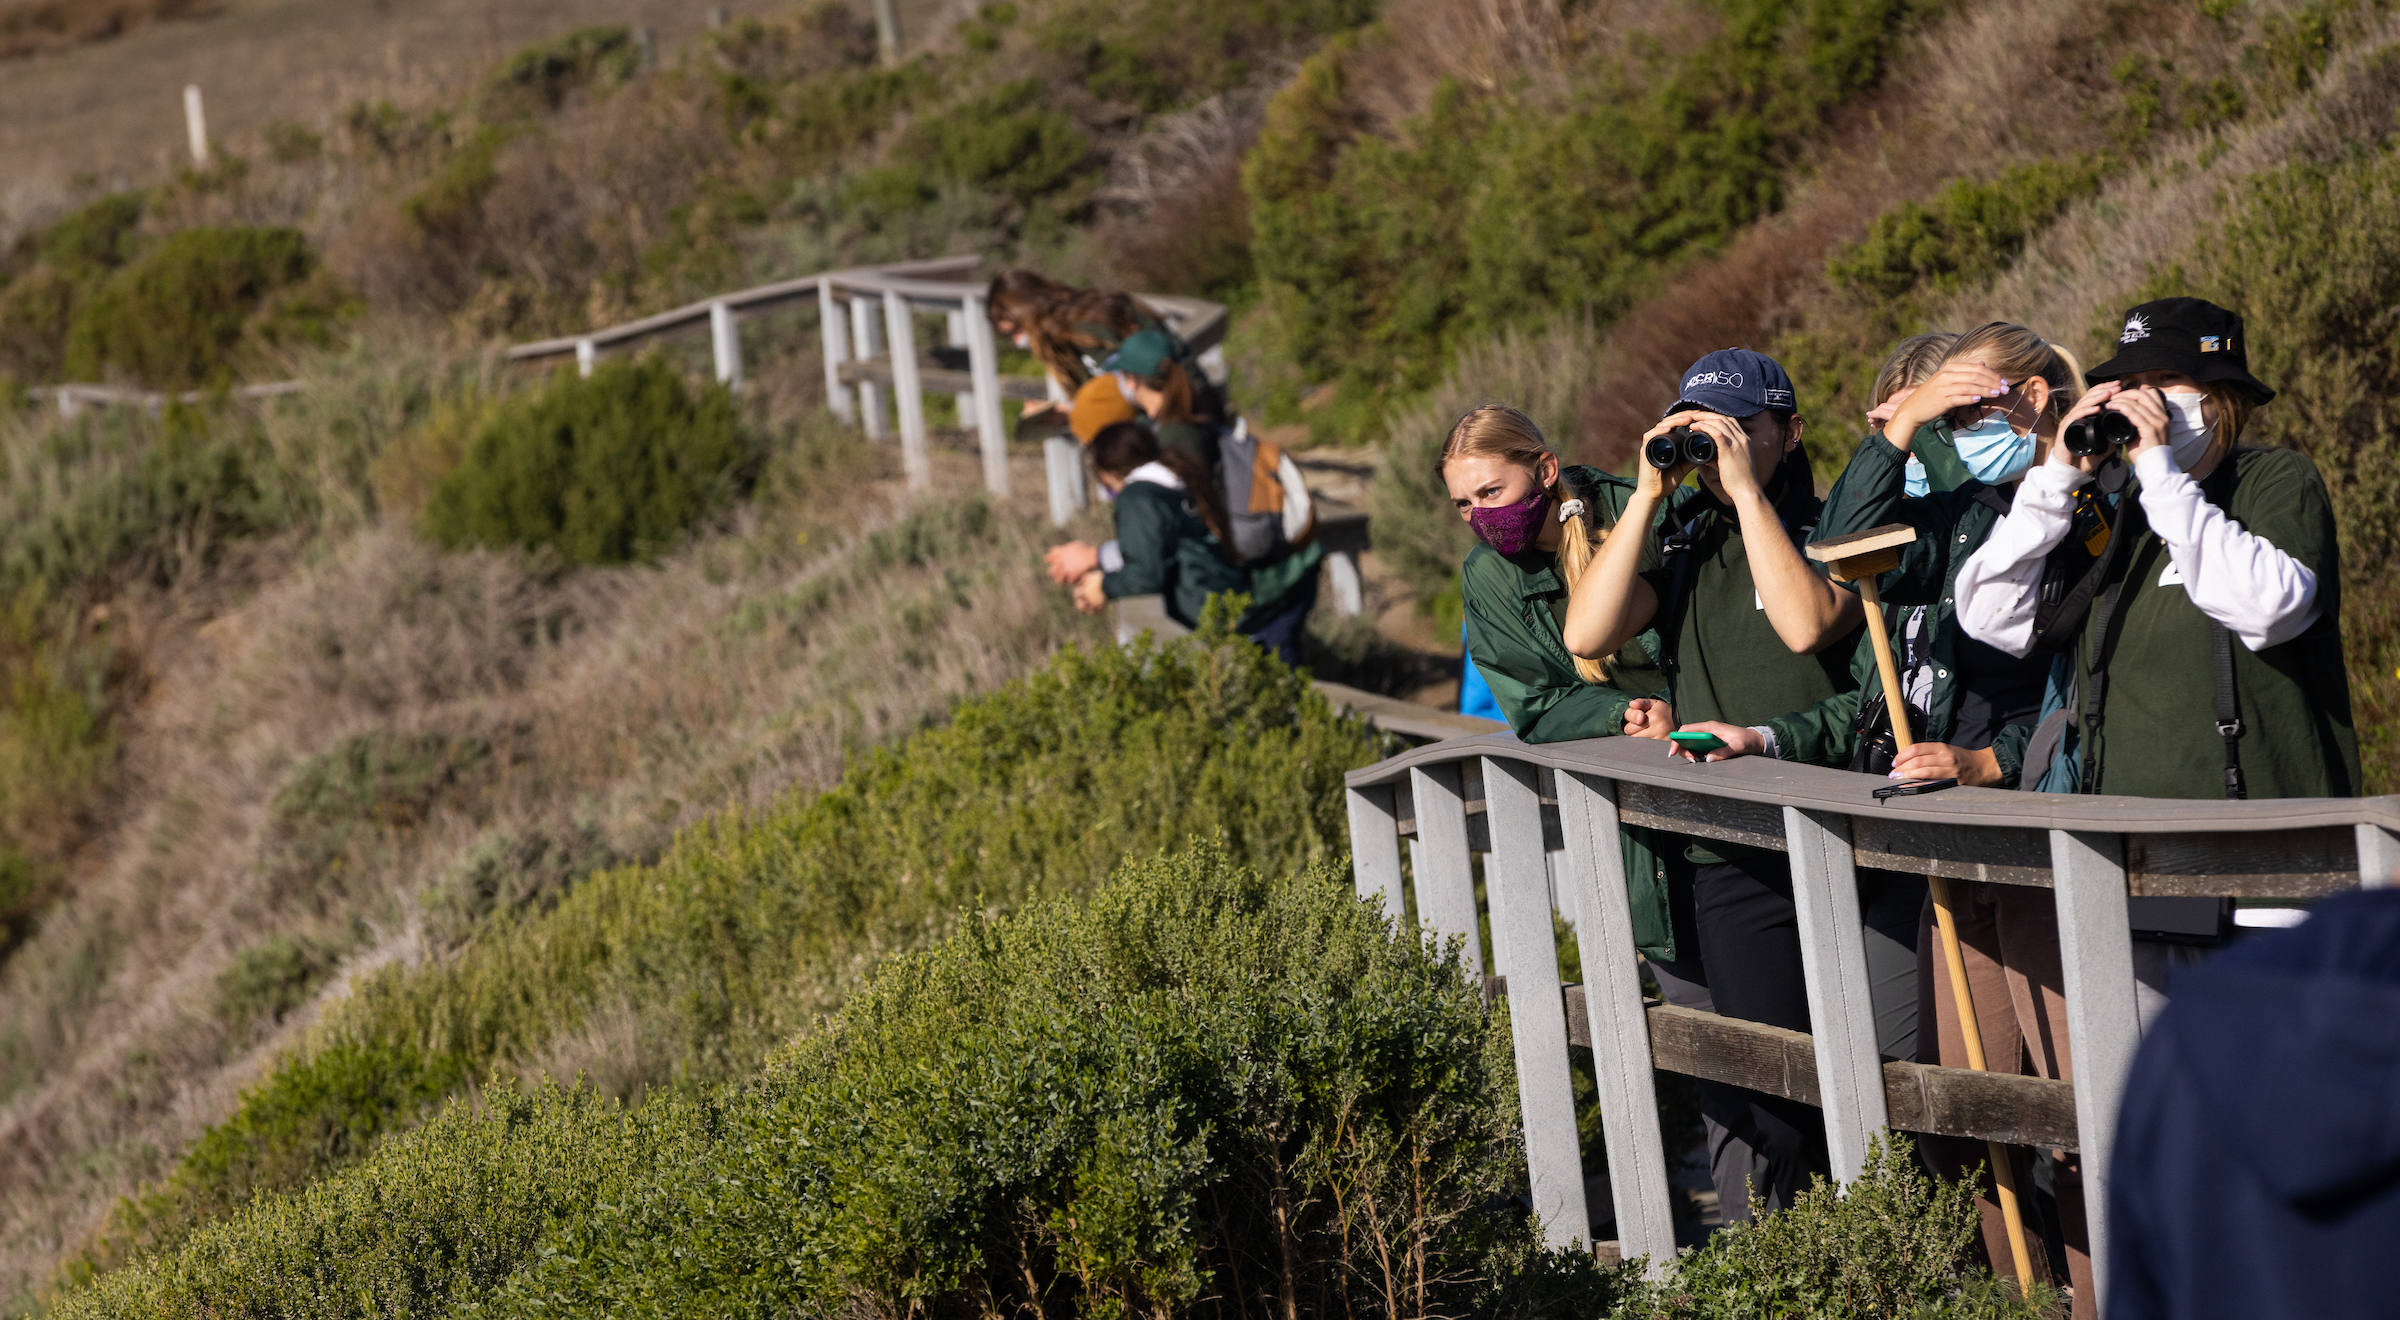 Researchers with Team Ellie survey elephant seals from the boardwalk at the Elephant Seal Vista Point north of Hearst Castle.